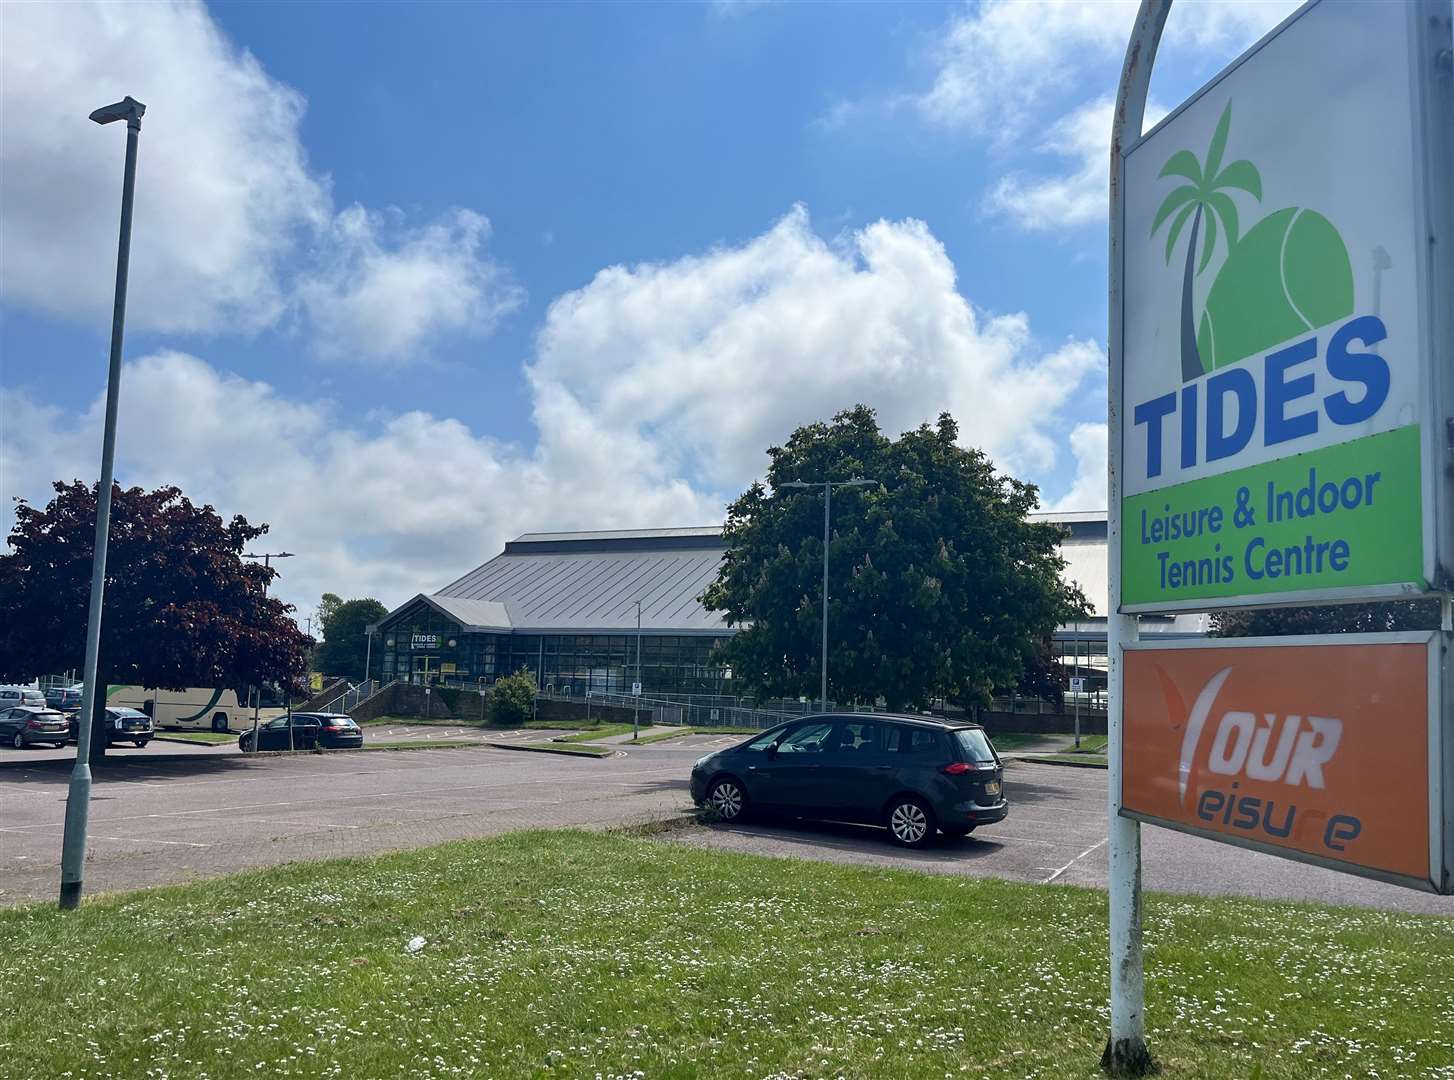 The pensioner wanted to play tennis at Tides Leisure Centre in Deal but was told they do not accept cash